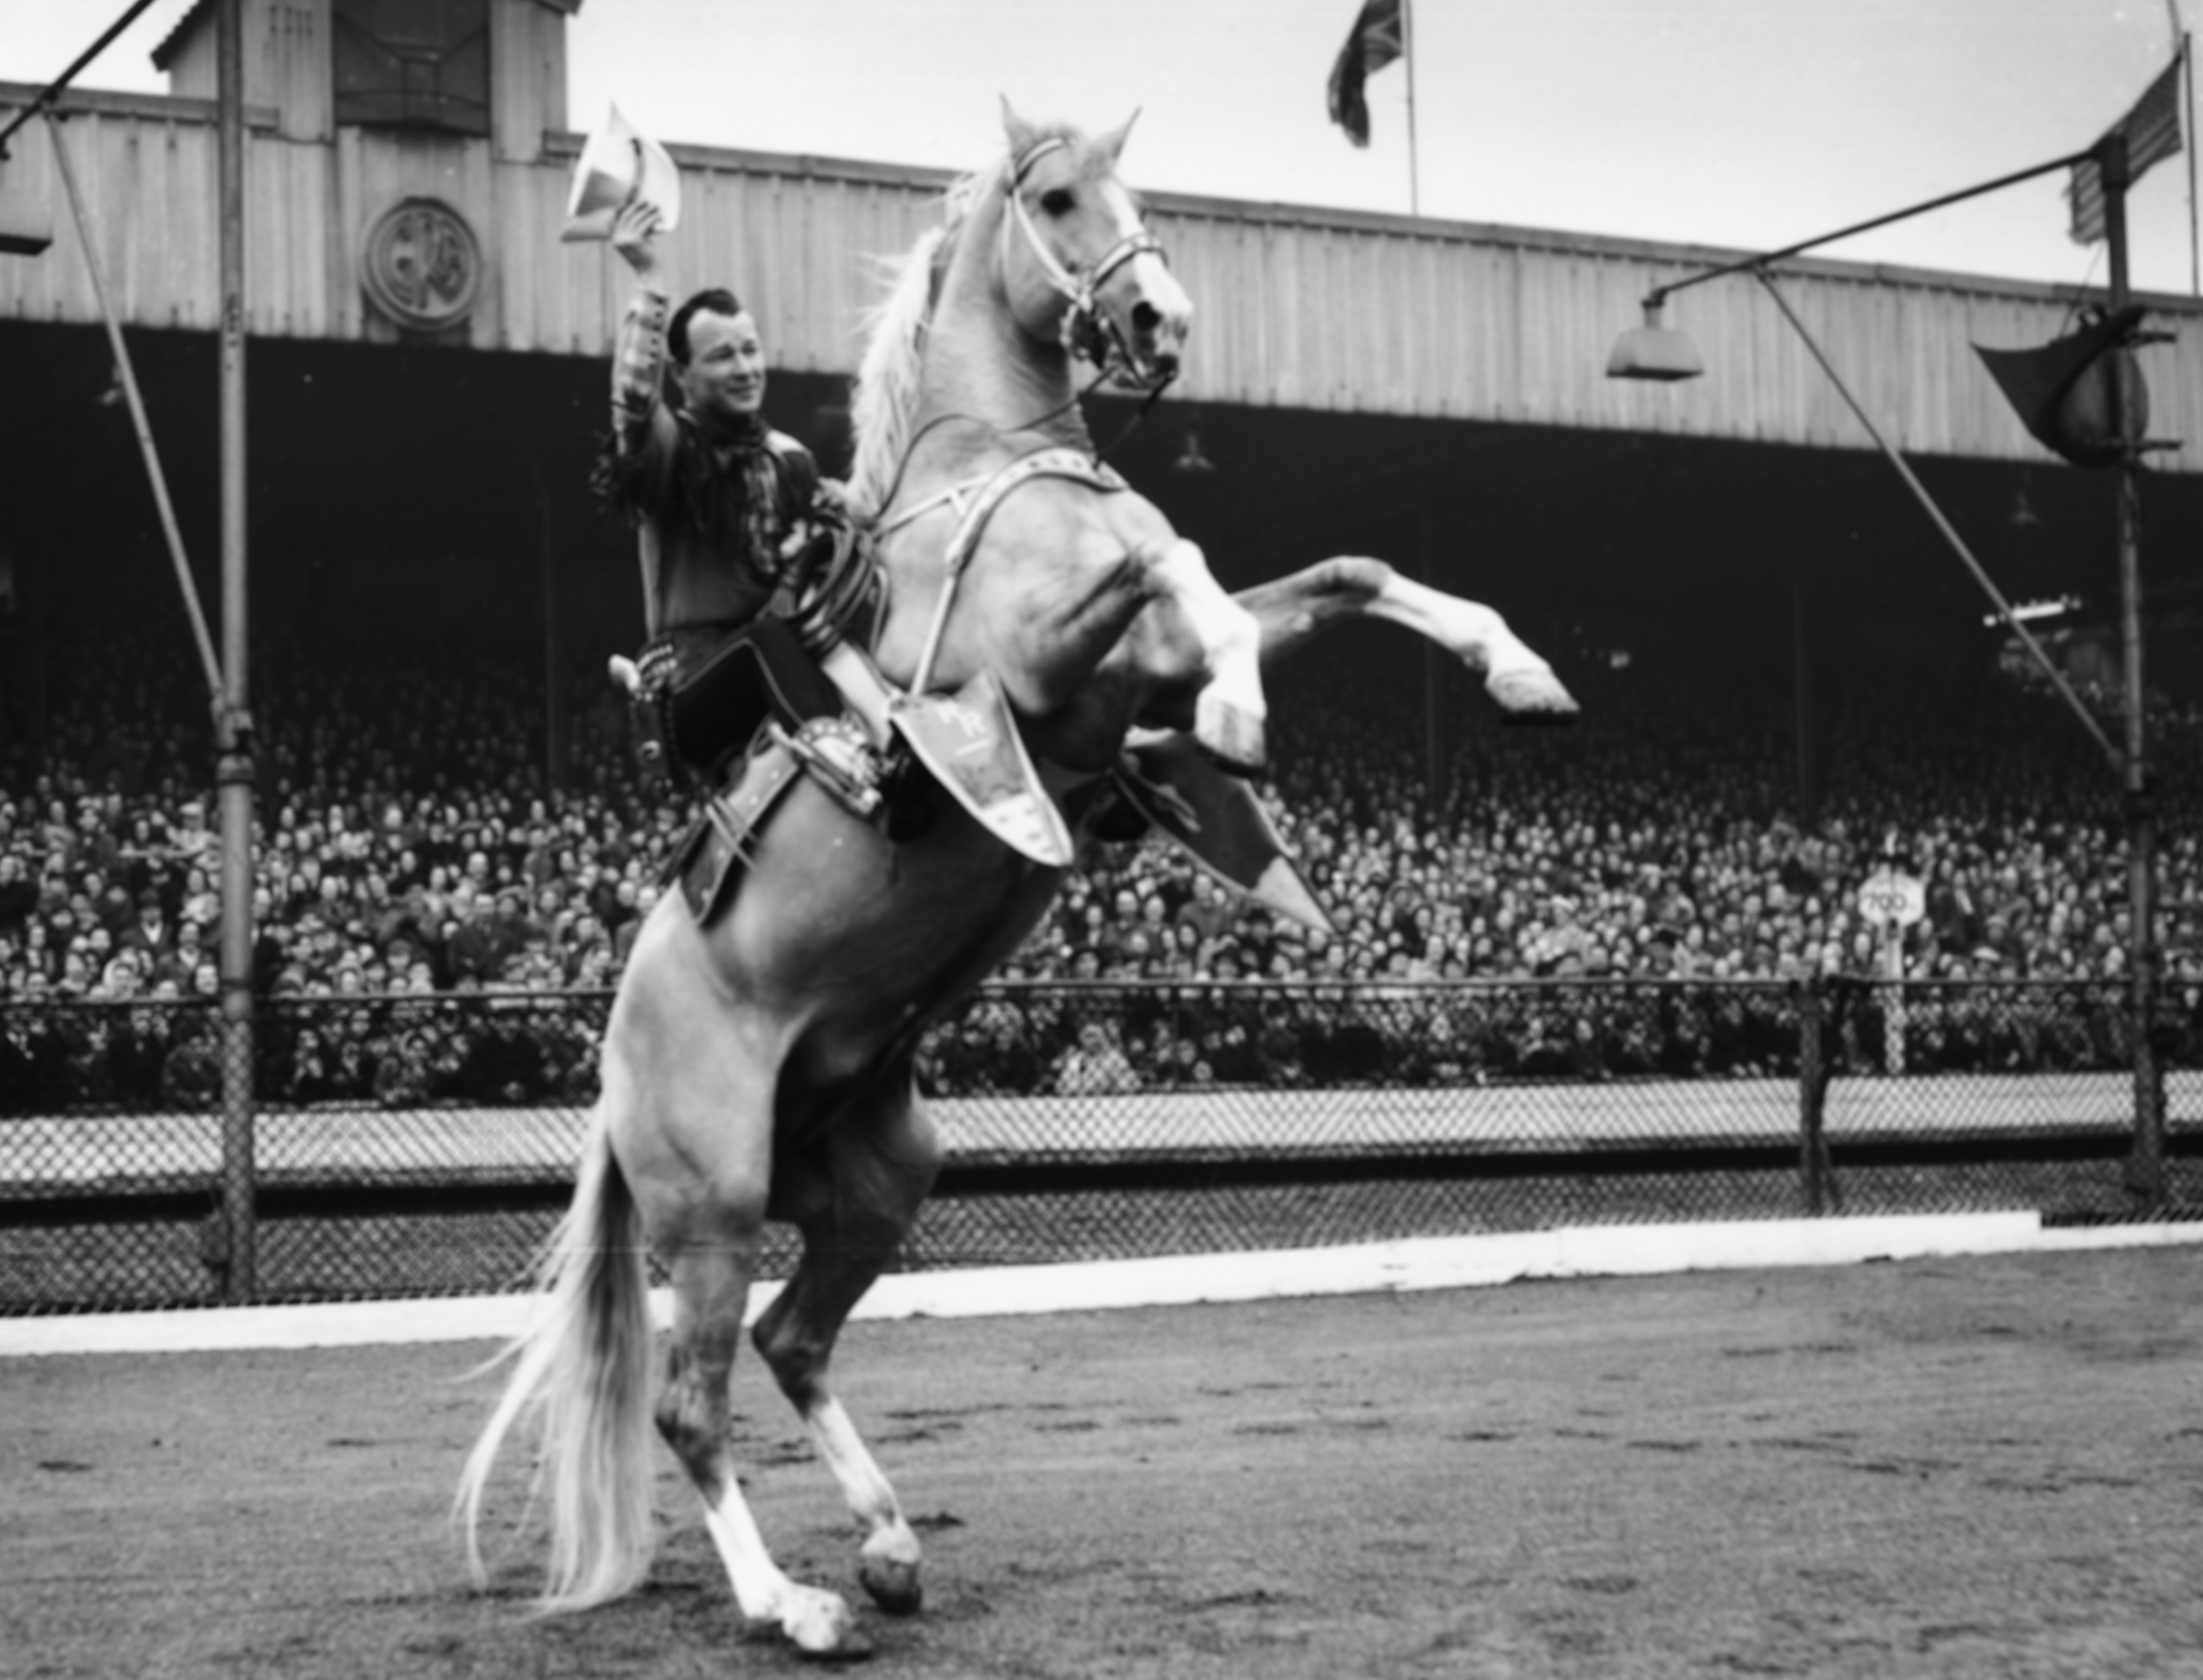 Actor Roy Rogers, the 'King of Cowboys', riding his horse Trigger in front of a group of school children at Harringay Stadium, London, March 20, 1954. | Source: Getty Images.